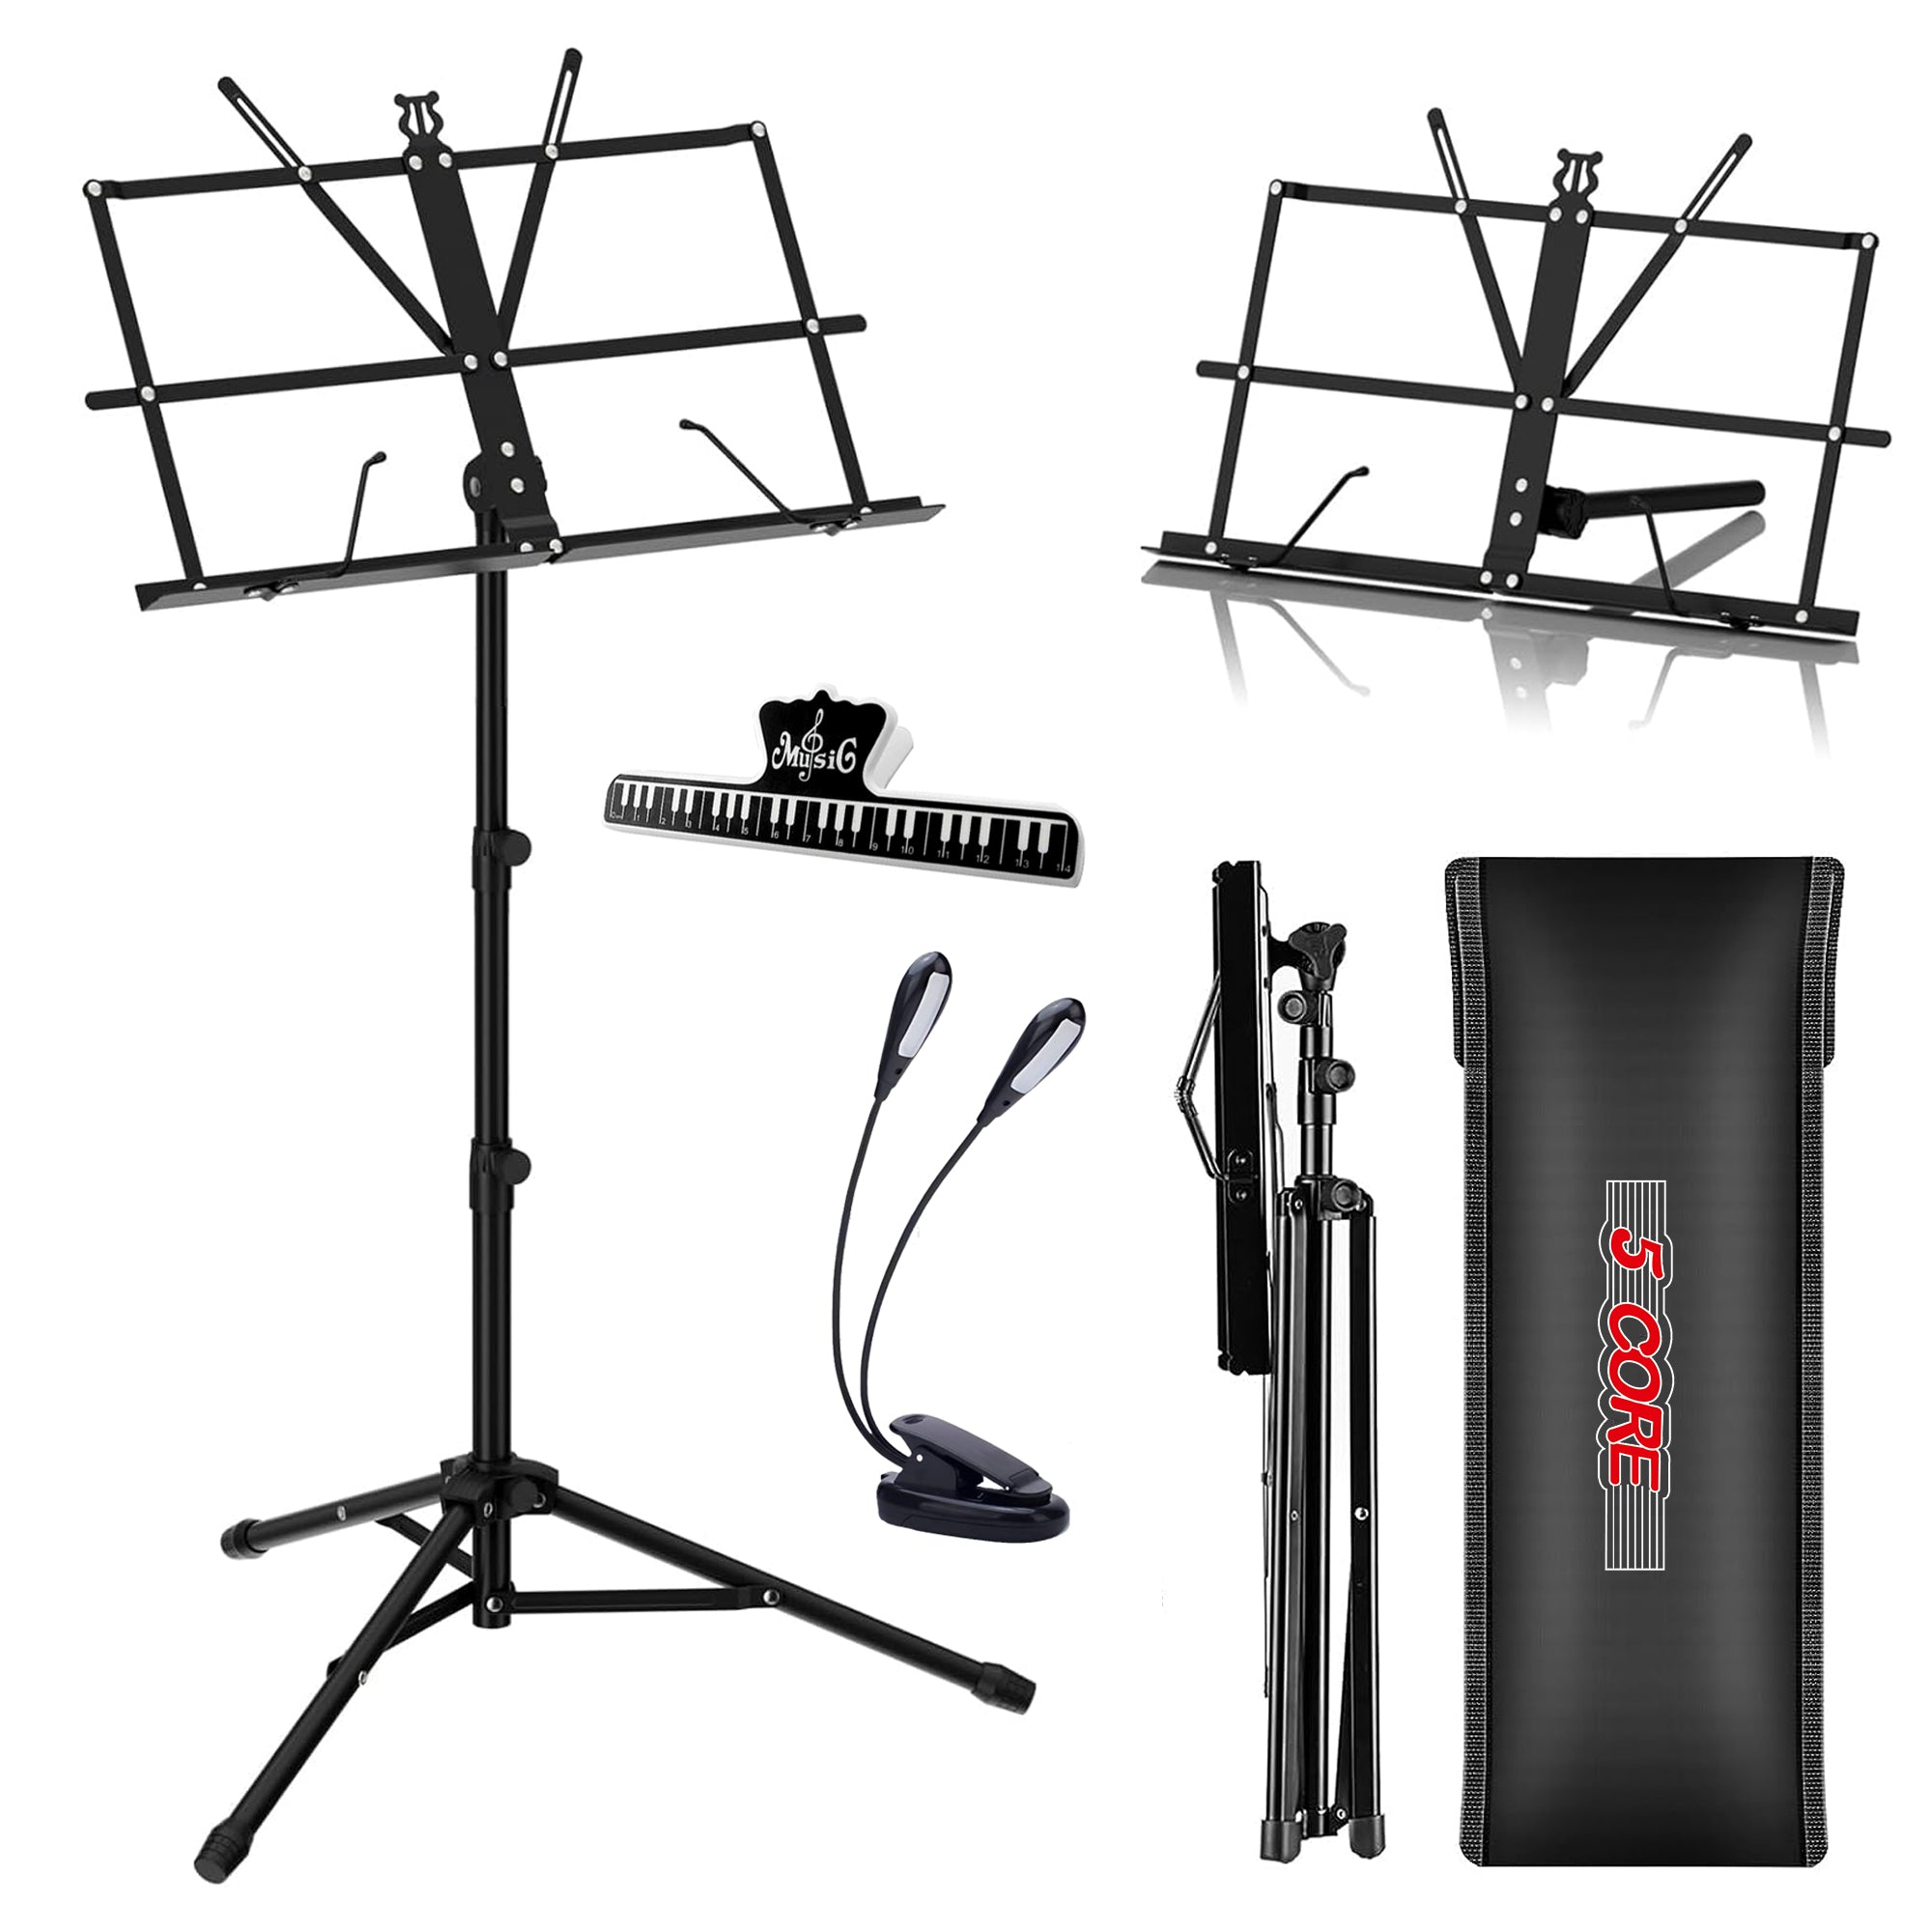 5 Core Sheet Music Stand Height Adjustable • Portable Foldable Music Note Holder w Music Clip